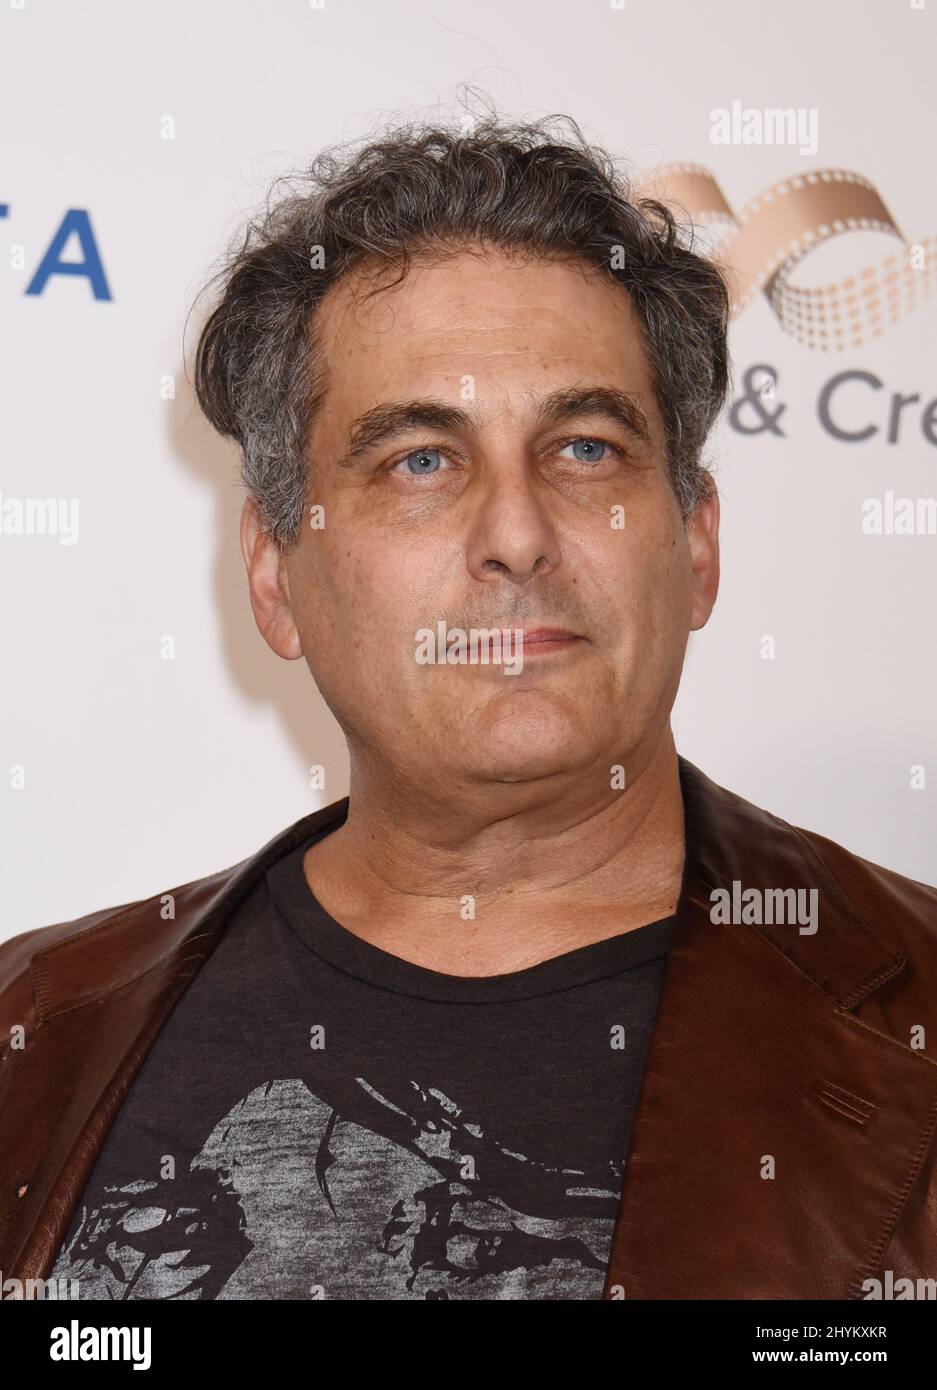 Jonathan Penner at the 8th Annual 'Reel Stories, Real Lives' Benefiting MPTF held at the Directors Guild of America on November 4, 2019 in Los Angeles, CA. Stock Photo